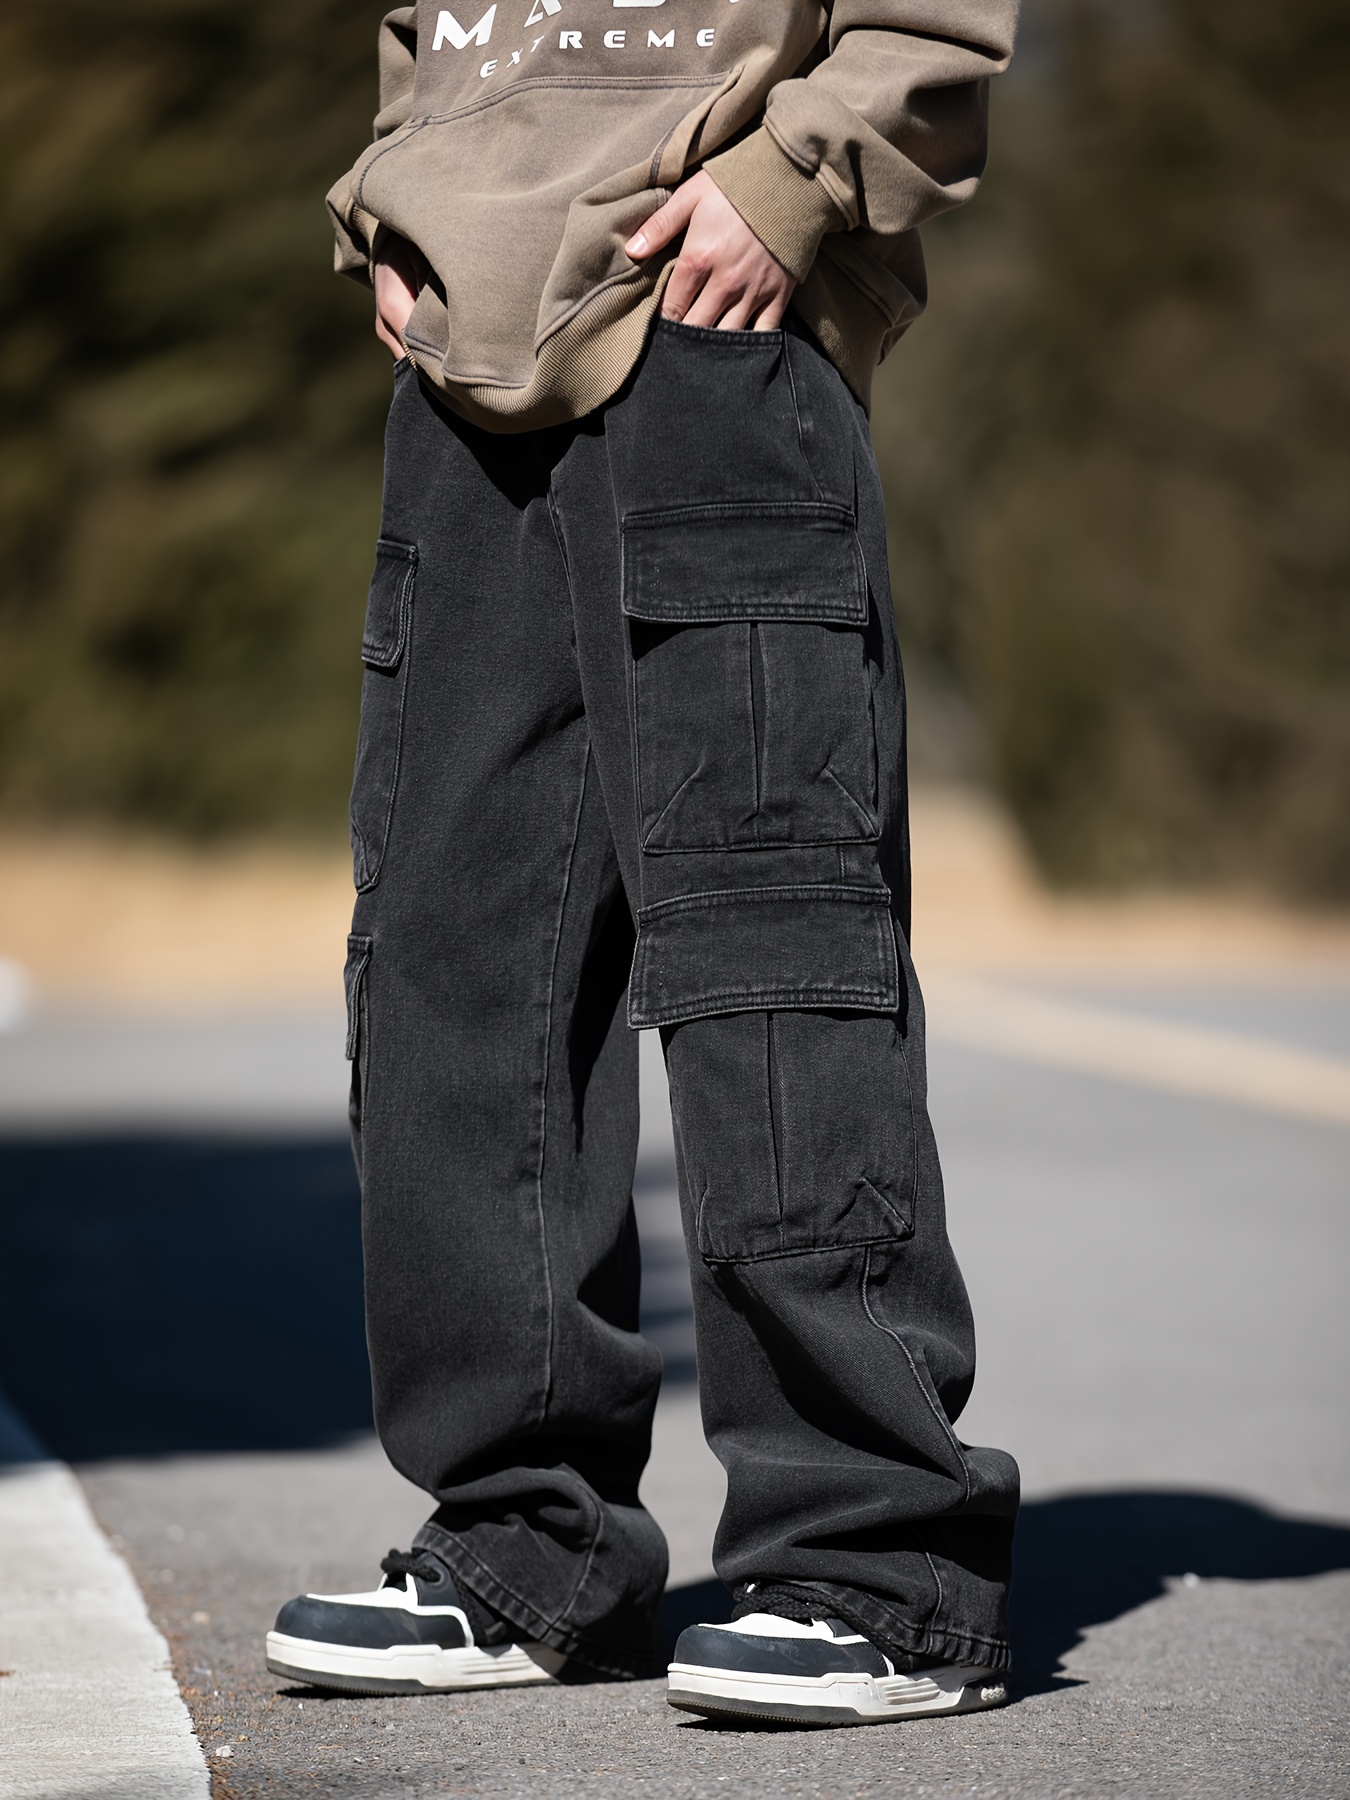 Cotton Multi Flap Pockets Men's Straight Leg Cargo Denim Pants, Loose  Casual Outdoor Baggy Pants, Men's Work Pants For Hiking Fishing Angling